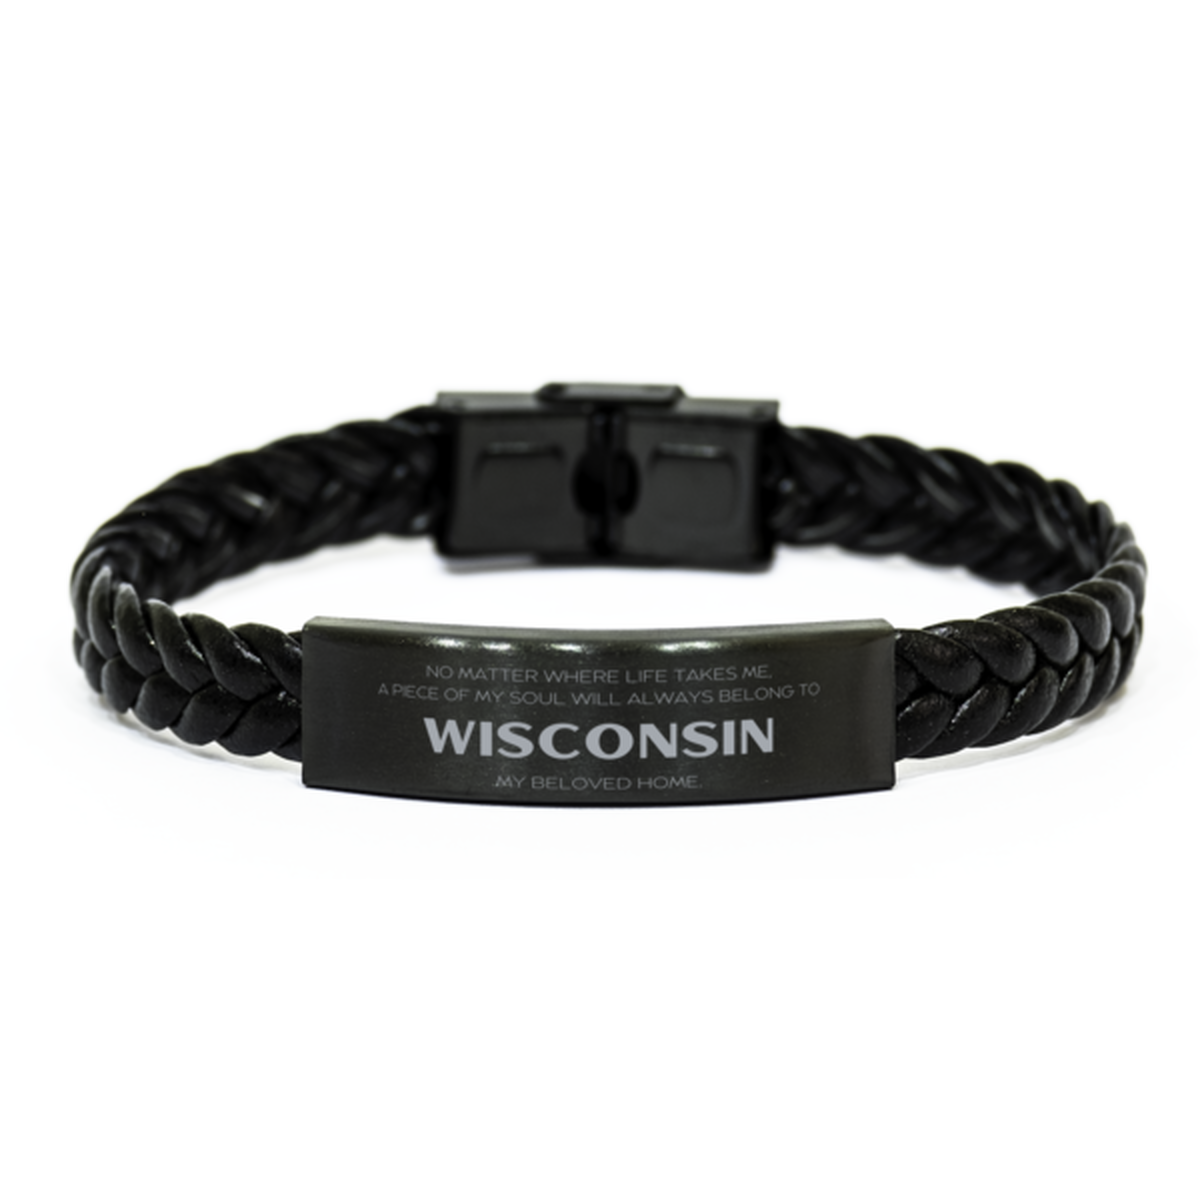 Love Wisconsin State Gifts, My soul will always belong to Wisconsin, Proud Braided Leather Bracelet, Birthday Unique Gifts For Wisconsin Men, Women, Friends